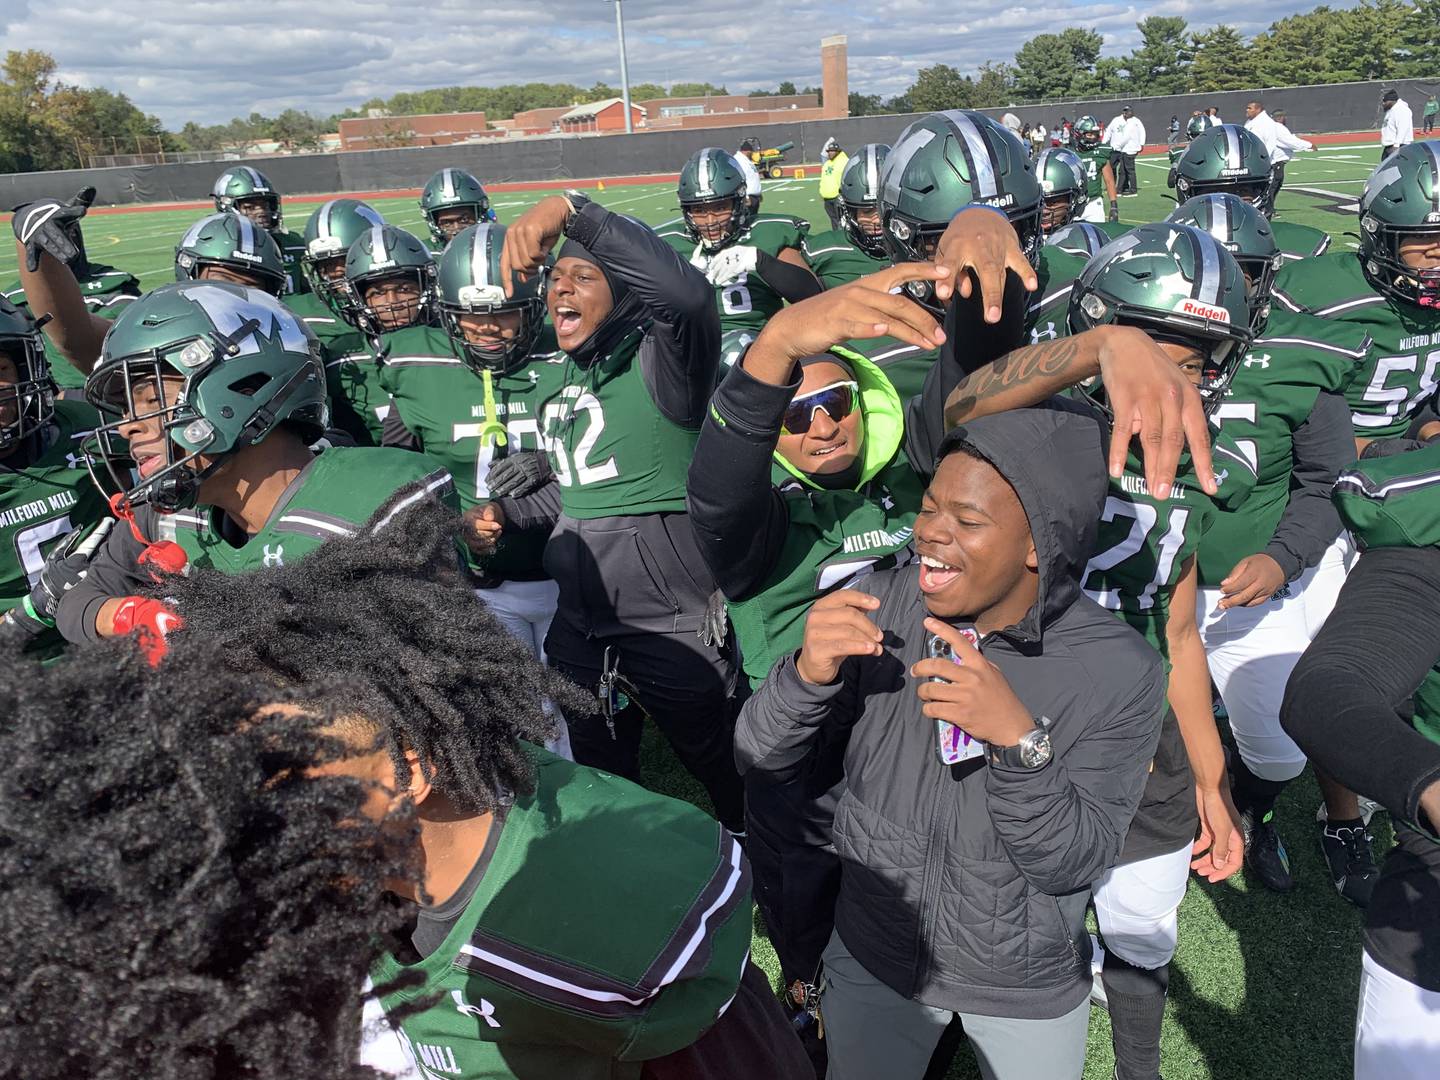 Milford Mill football team celebrates after victory over New Town Oct. 8.